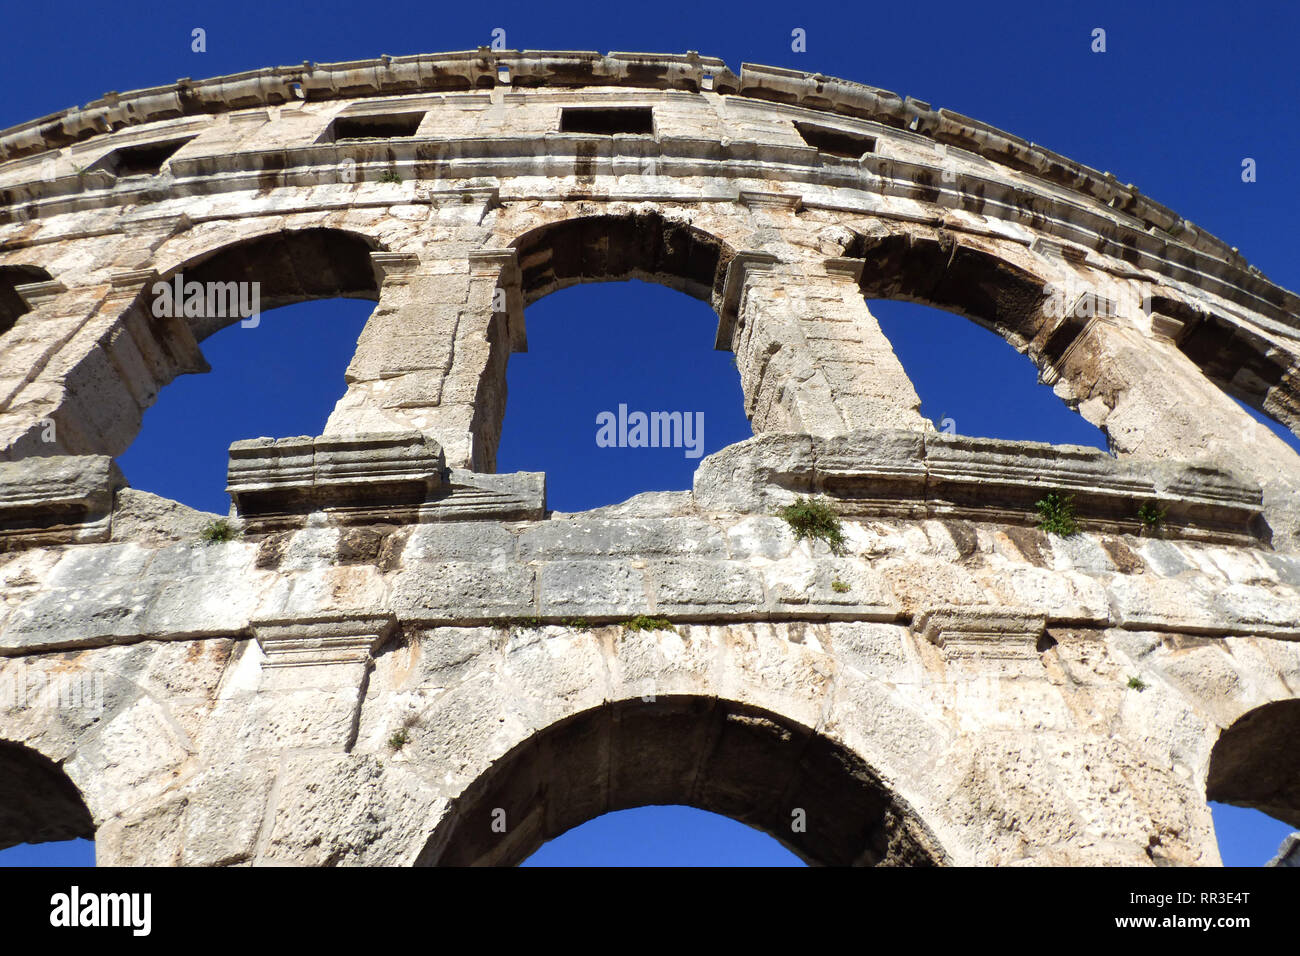 Pula pola colosseum architecture details with arched windows summertime Stock Photo